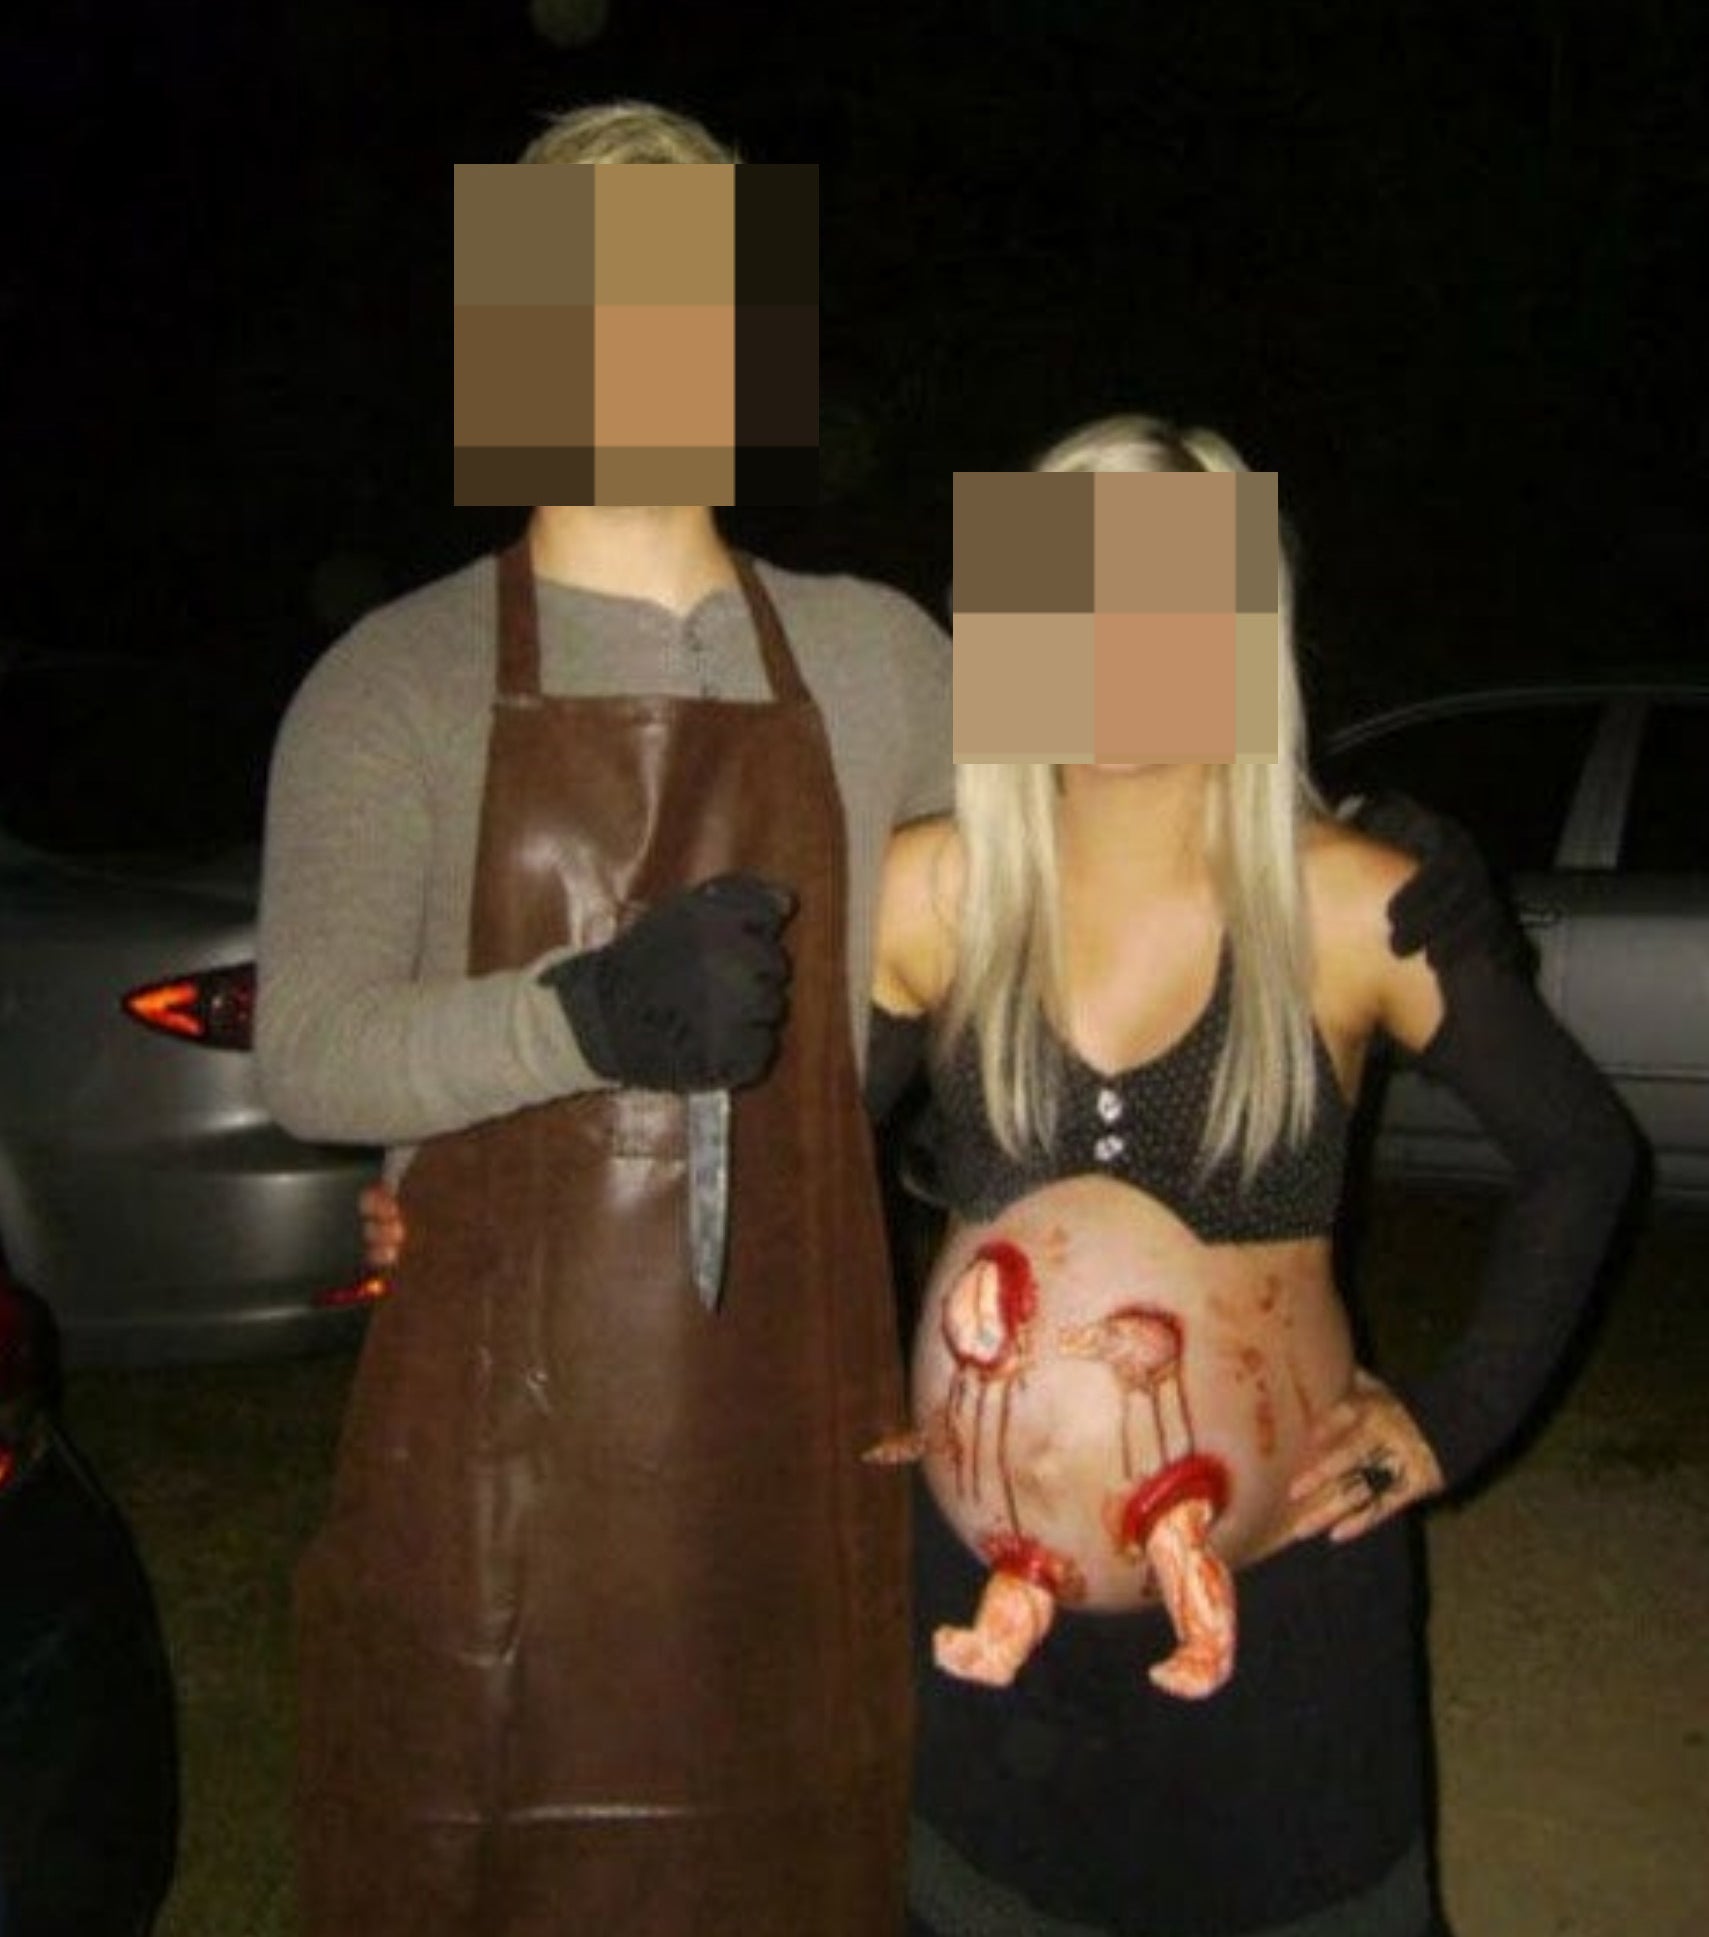 A graphic couples costume in which one partner is holding a bloody knife, and the other is a pregnant woman with bloody baby limbs protruding from her stomach